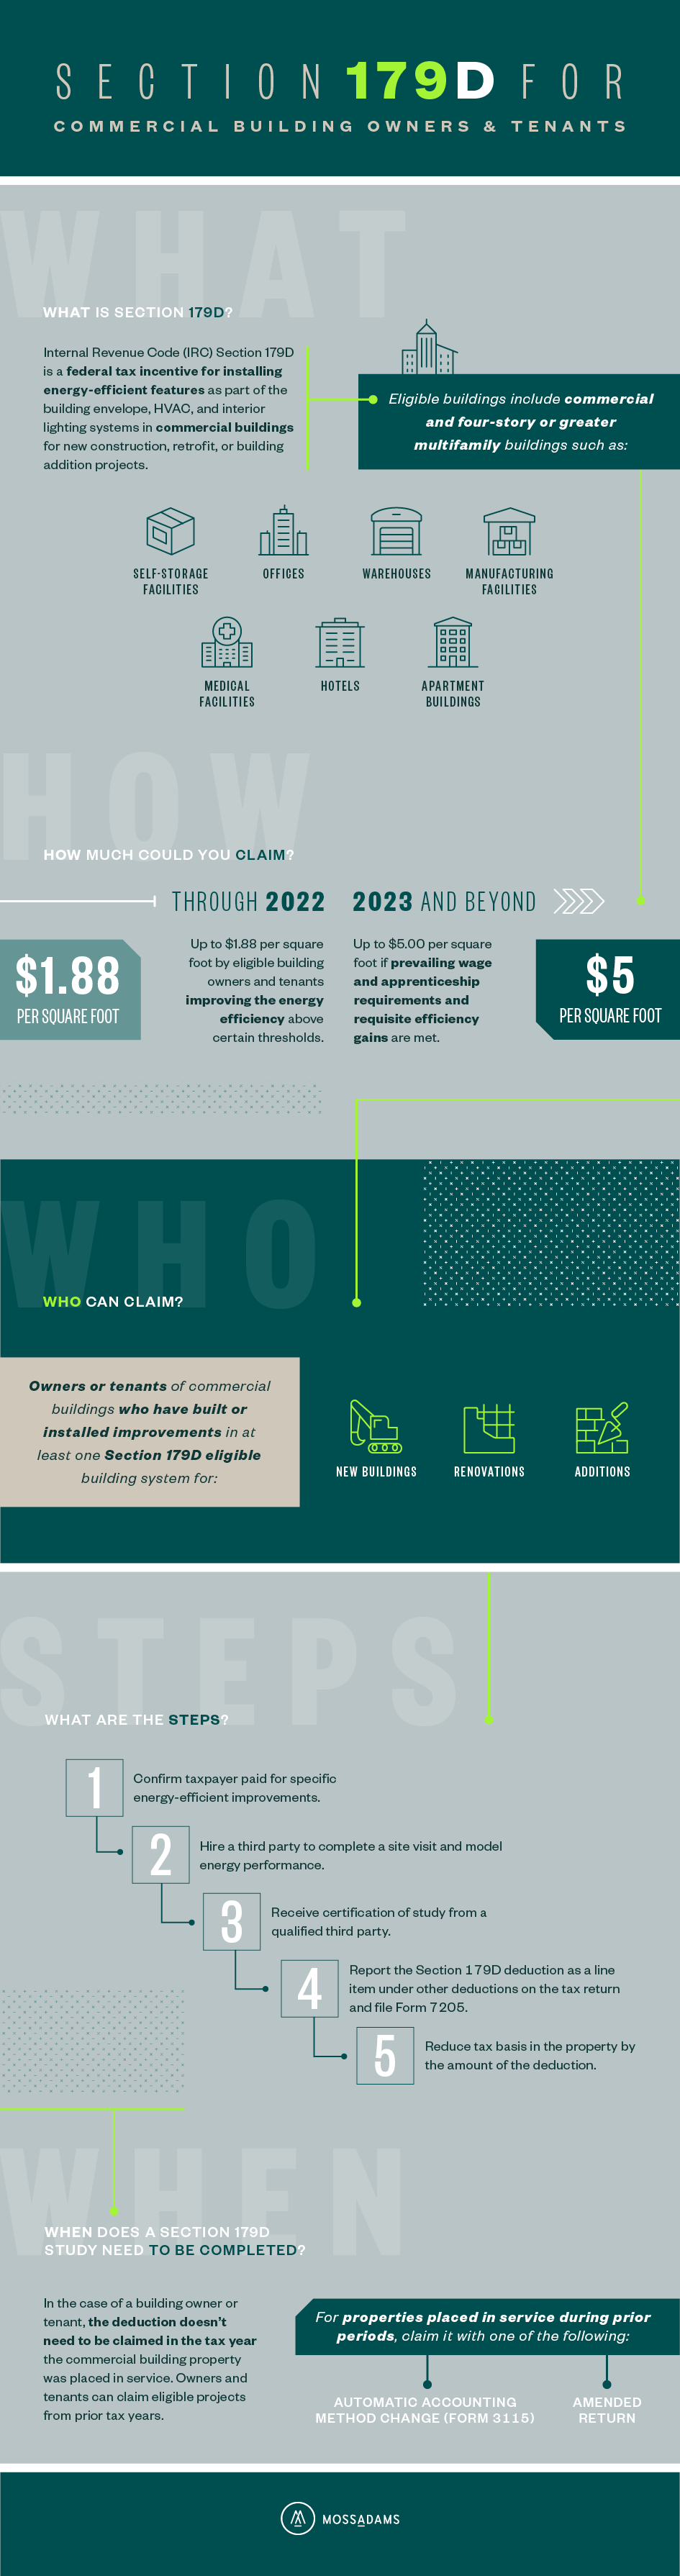 179D tax deduction infographic describing what it is, how much building owners and tenants can claim, and more.